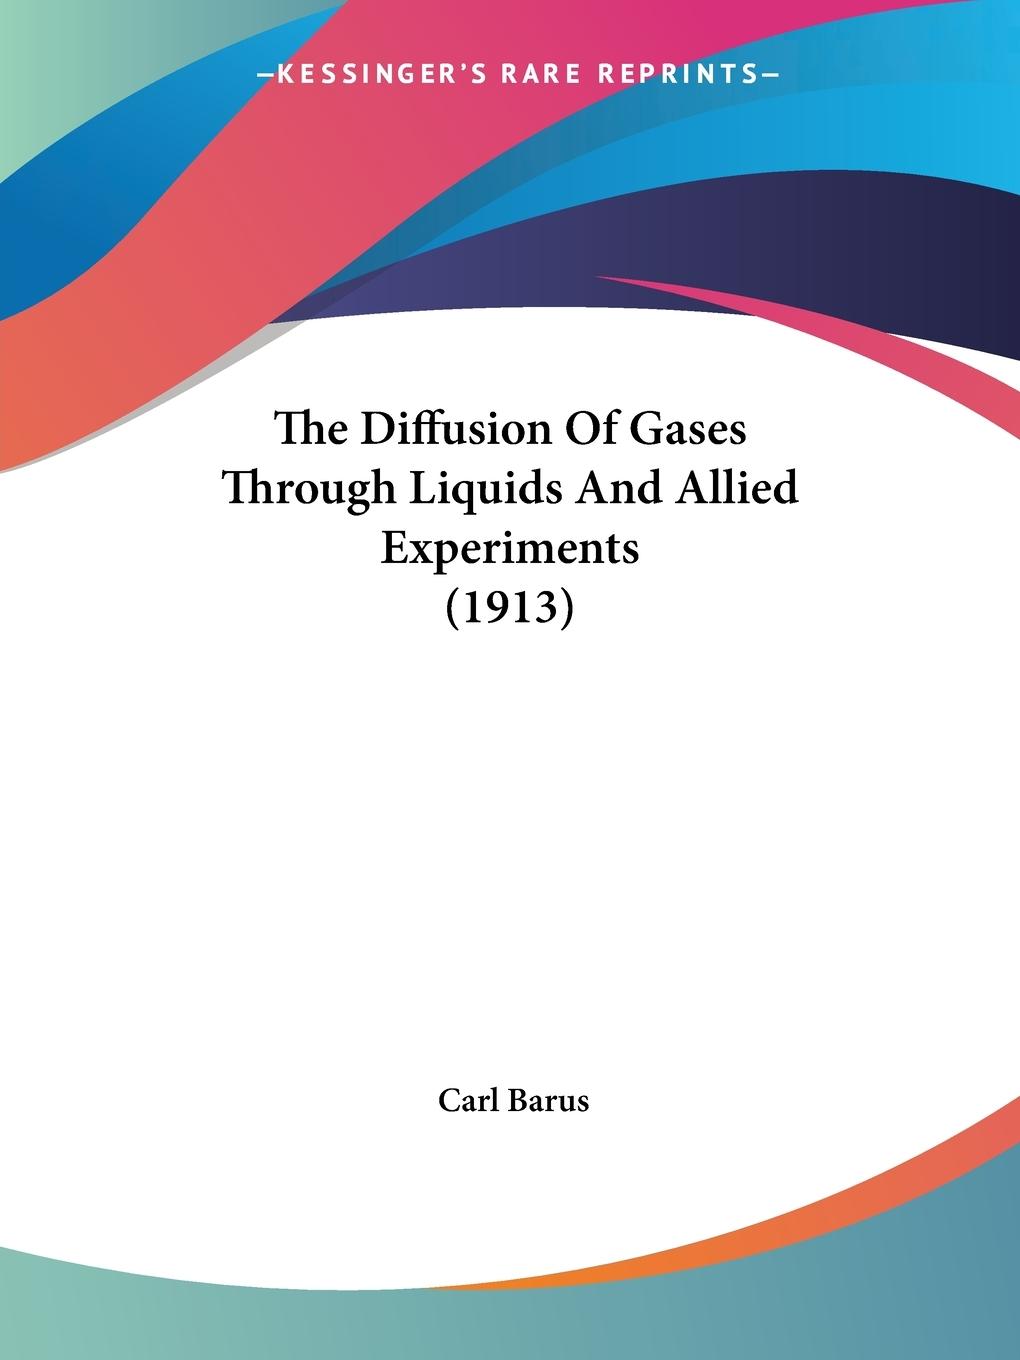 The Diffusion Of Gases Through Liquids And Allied Experiments (1913) - Barus, Carl